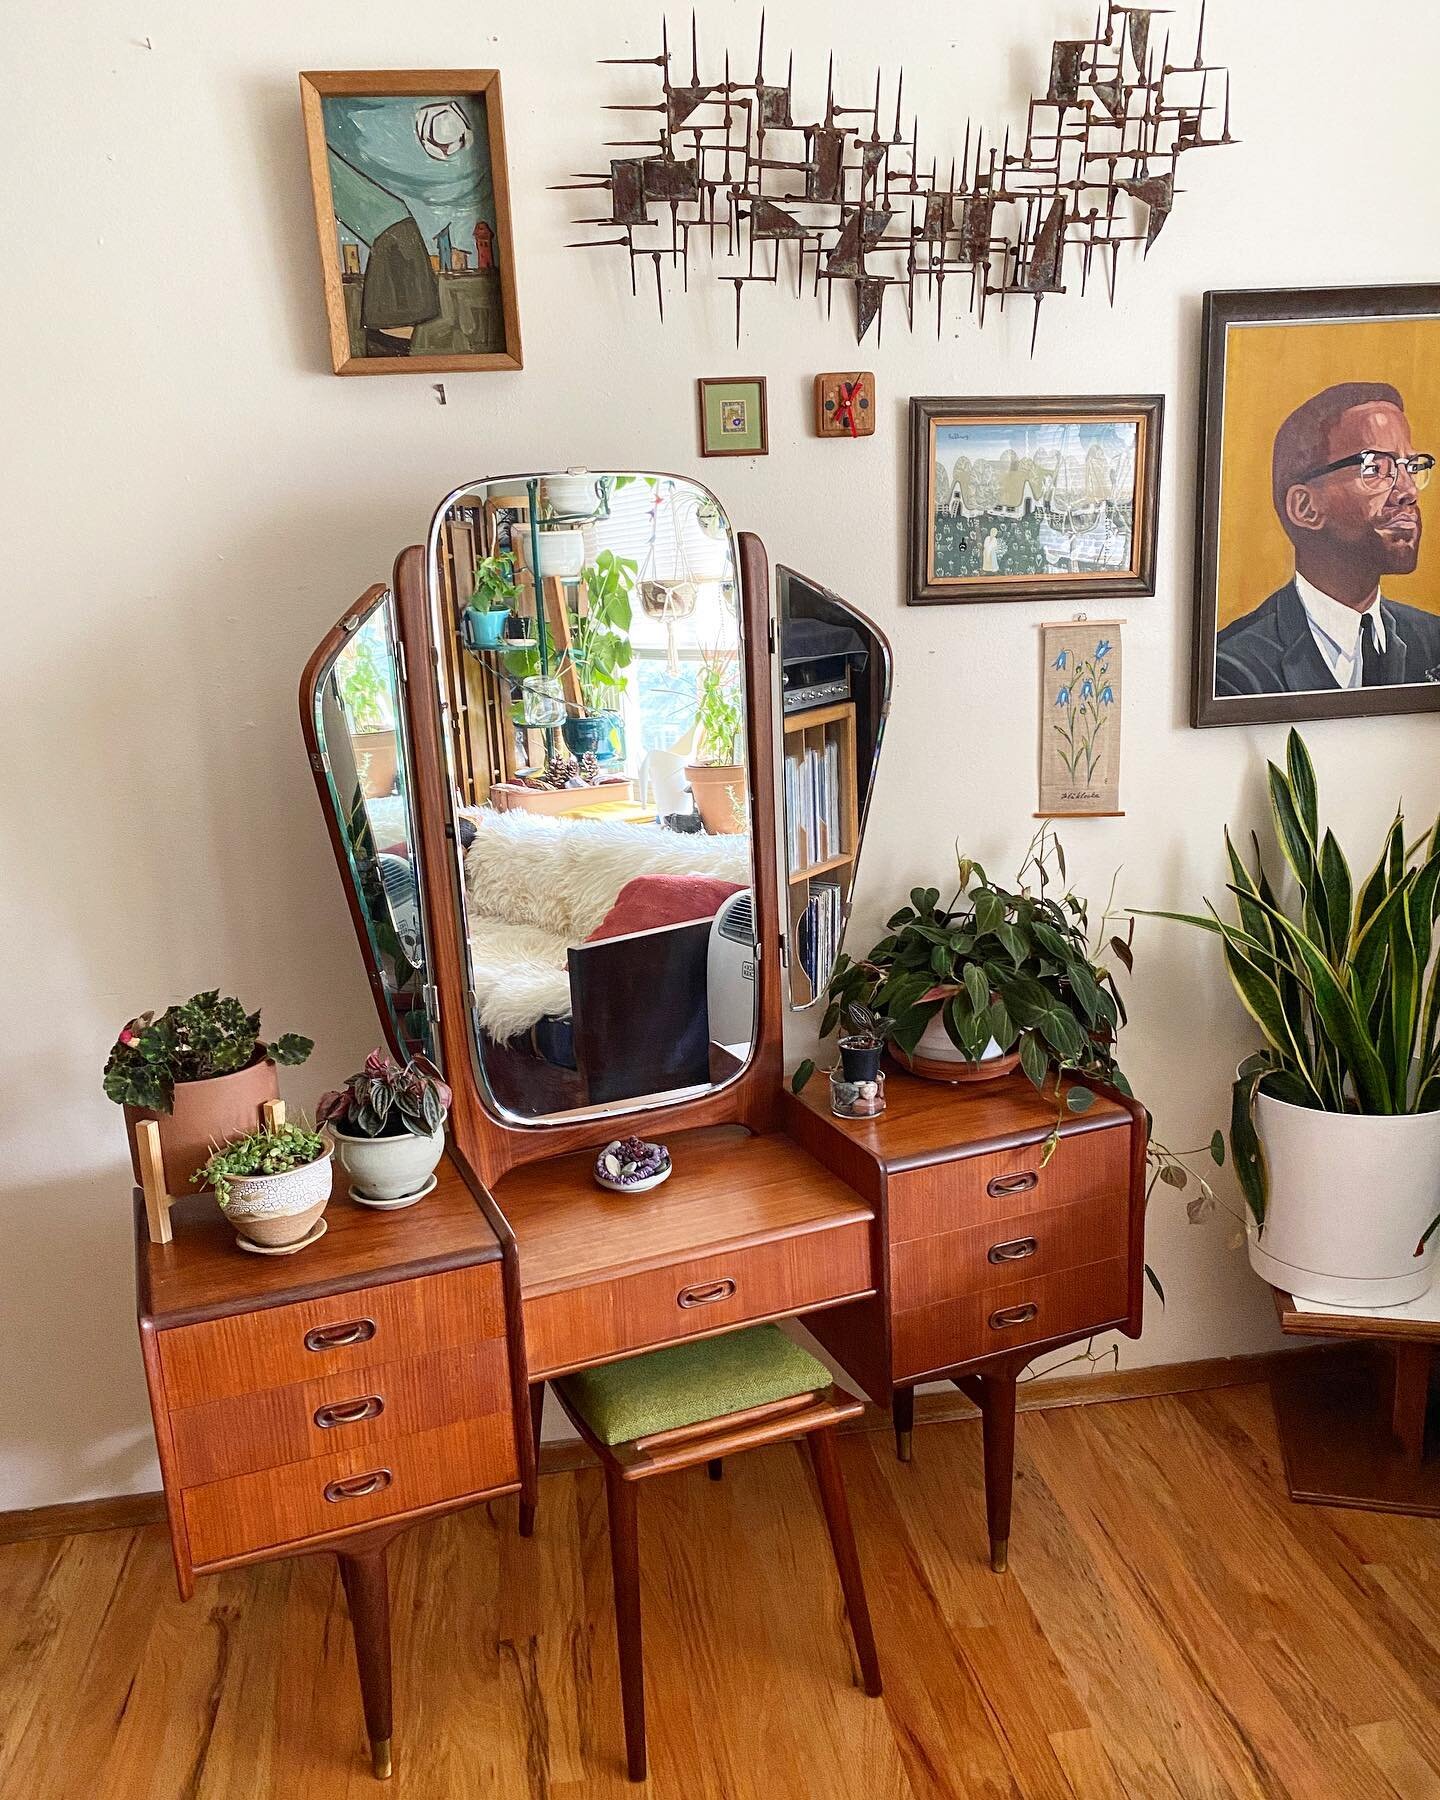 The cutest little vanity &amp; stool we ever did see. 🥺

Folding three-part mirror, original green wool upholstery on the stool, lots of little drawers - all the best features. I think this would also make an adorable little entryway table or plant 